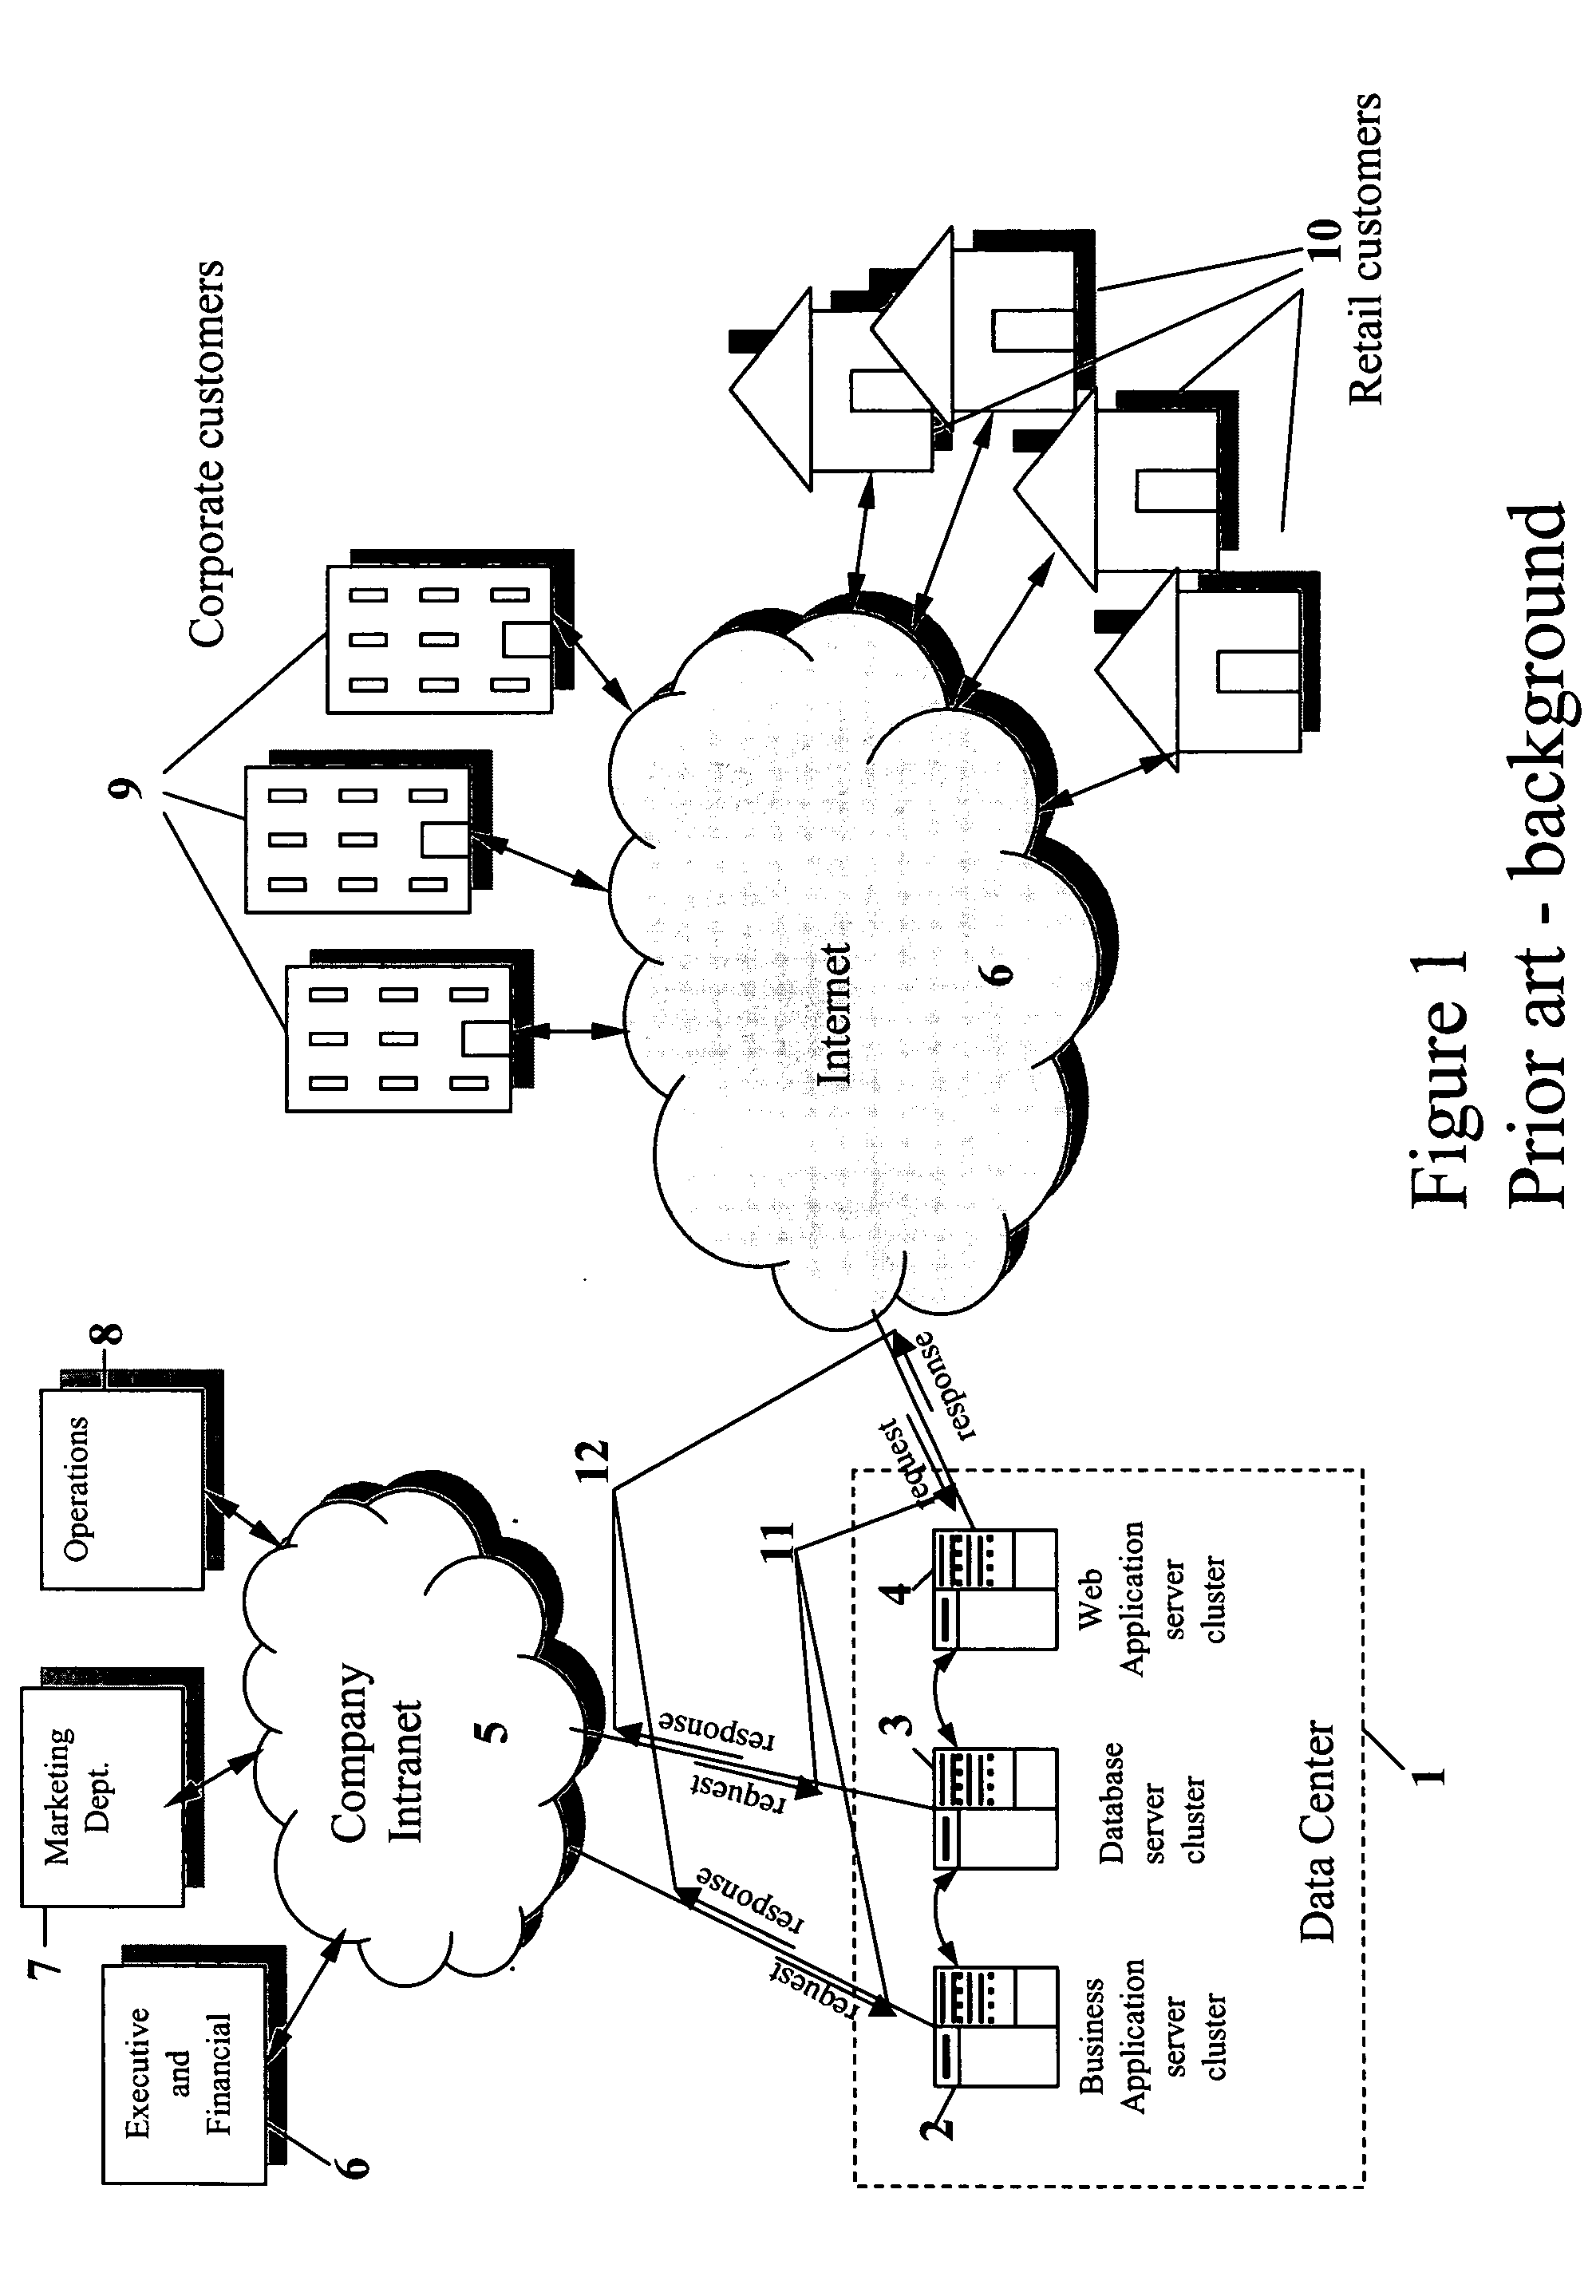 Apparatus and method for capacity planning for data center server consolidation and workload reassignment